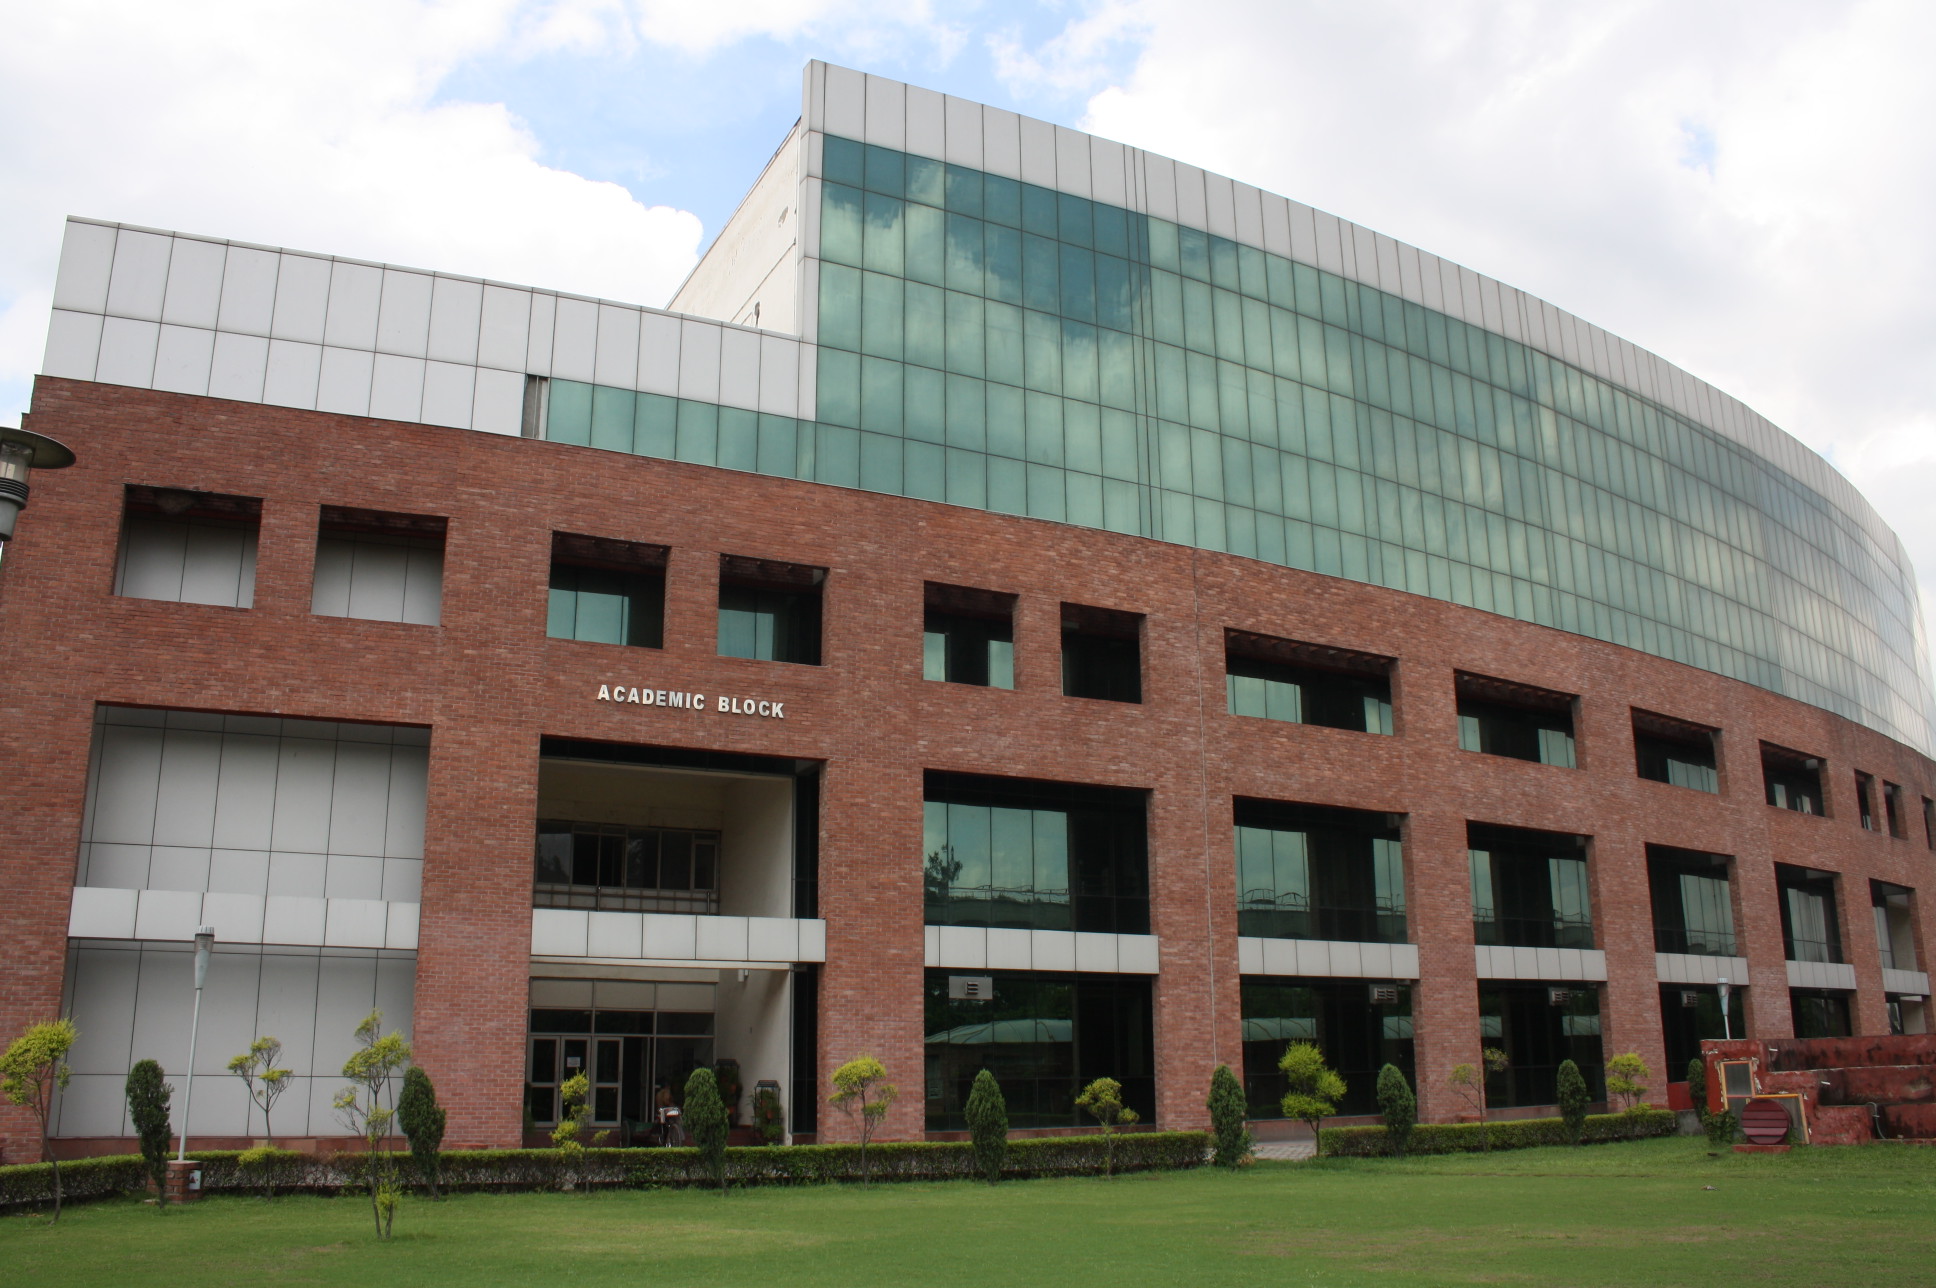 Army College of Medical Sciences, New Delhi